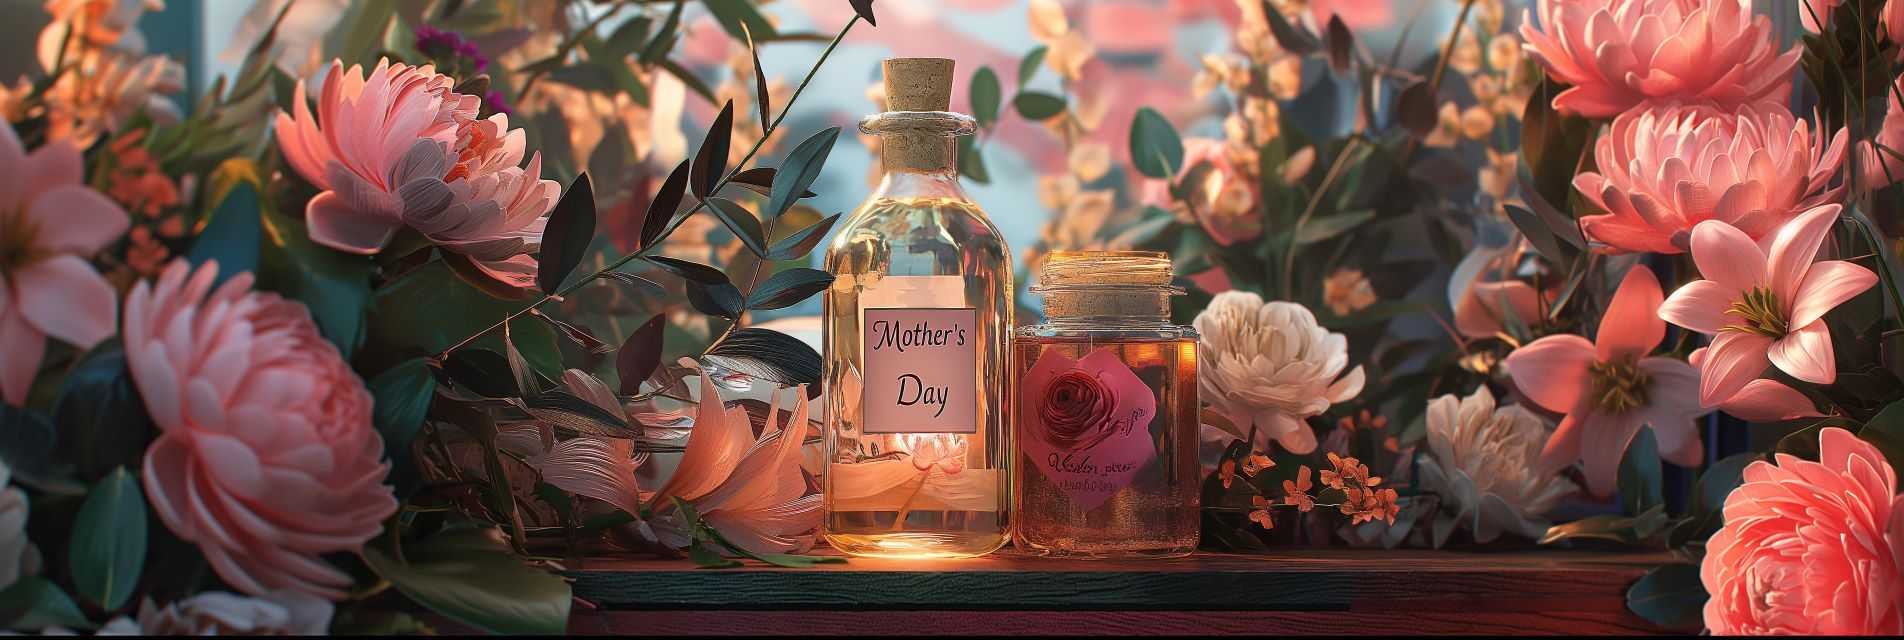 Mother's Day - A tribute to her